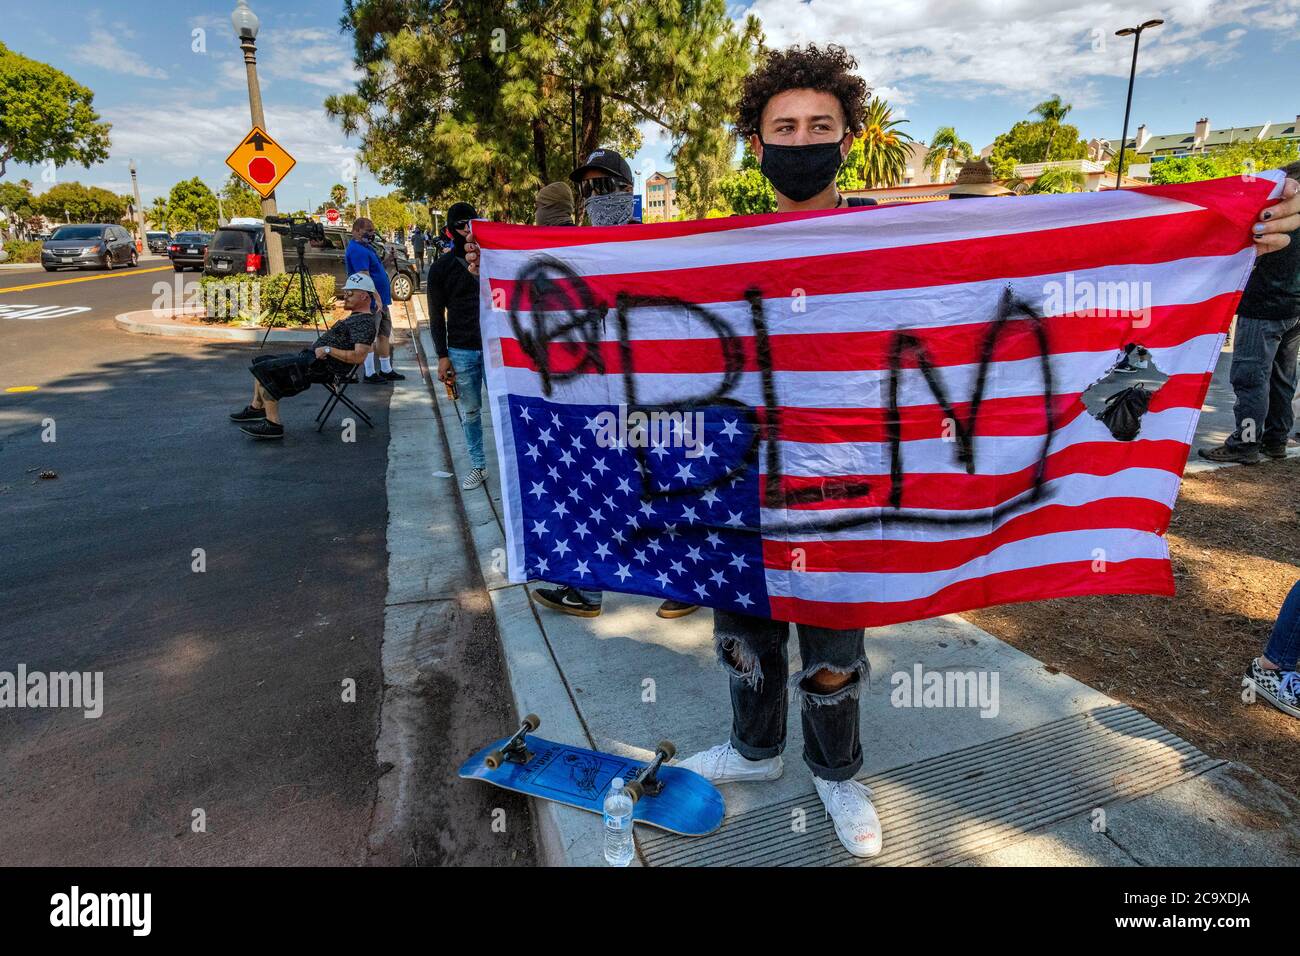 La Mesa, California, USA. 1st Aug, 2020. A participant in a Black Lives Matter Protest in La Mesa, California on August 1, 2020, holds an upside-down US flag. An upside-down flag is a universal sign of distress, and this flag has been marked with Ã¢â‚¬Å“BLMÃ¢â‚¬Â for for the Black Lives Matter movement and an Ã¢â‚¬Å“AÃ¢â‚¬Â in a circle that signifies anarchy. Credit: David Barak/ZUMA Wire/Alamy Live News Stock Photo